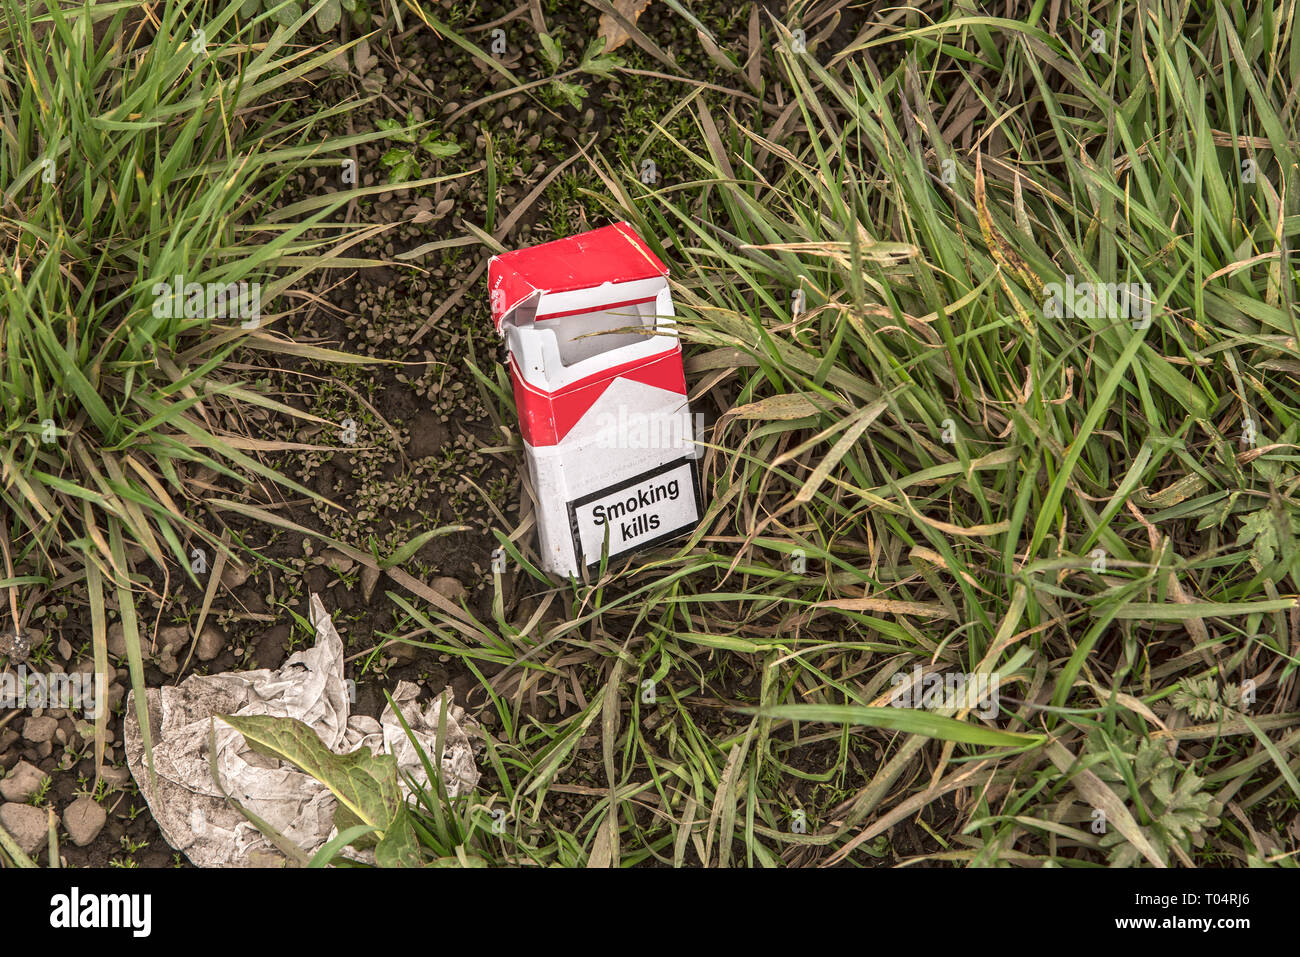 An empty pack of cigarettes with the text, 'Smoking Kills' written on the front, littered in the grass. Taken in Iceland. Stock Photo